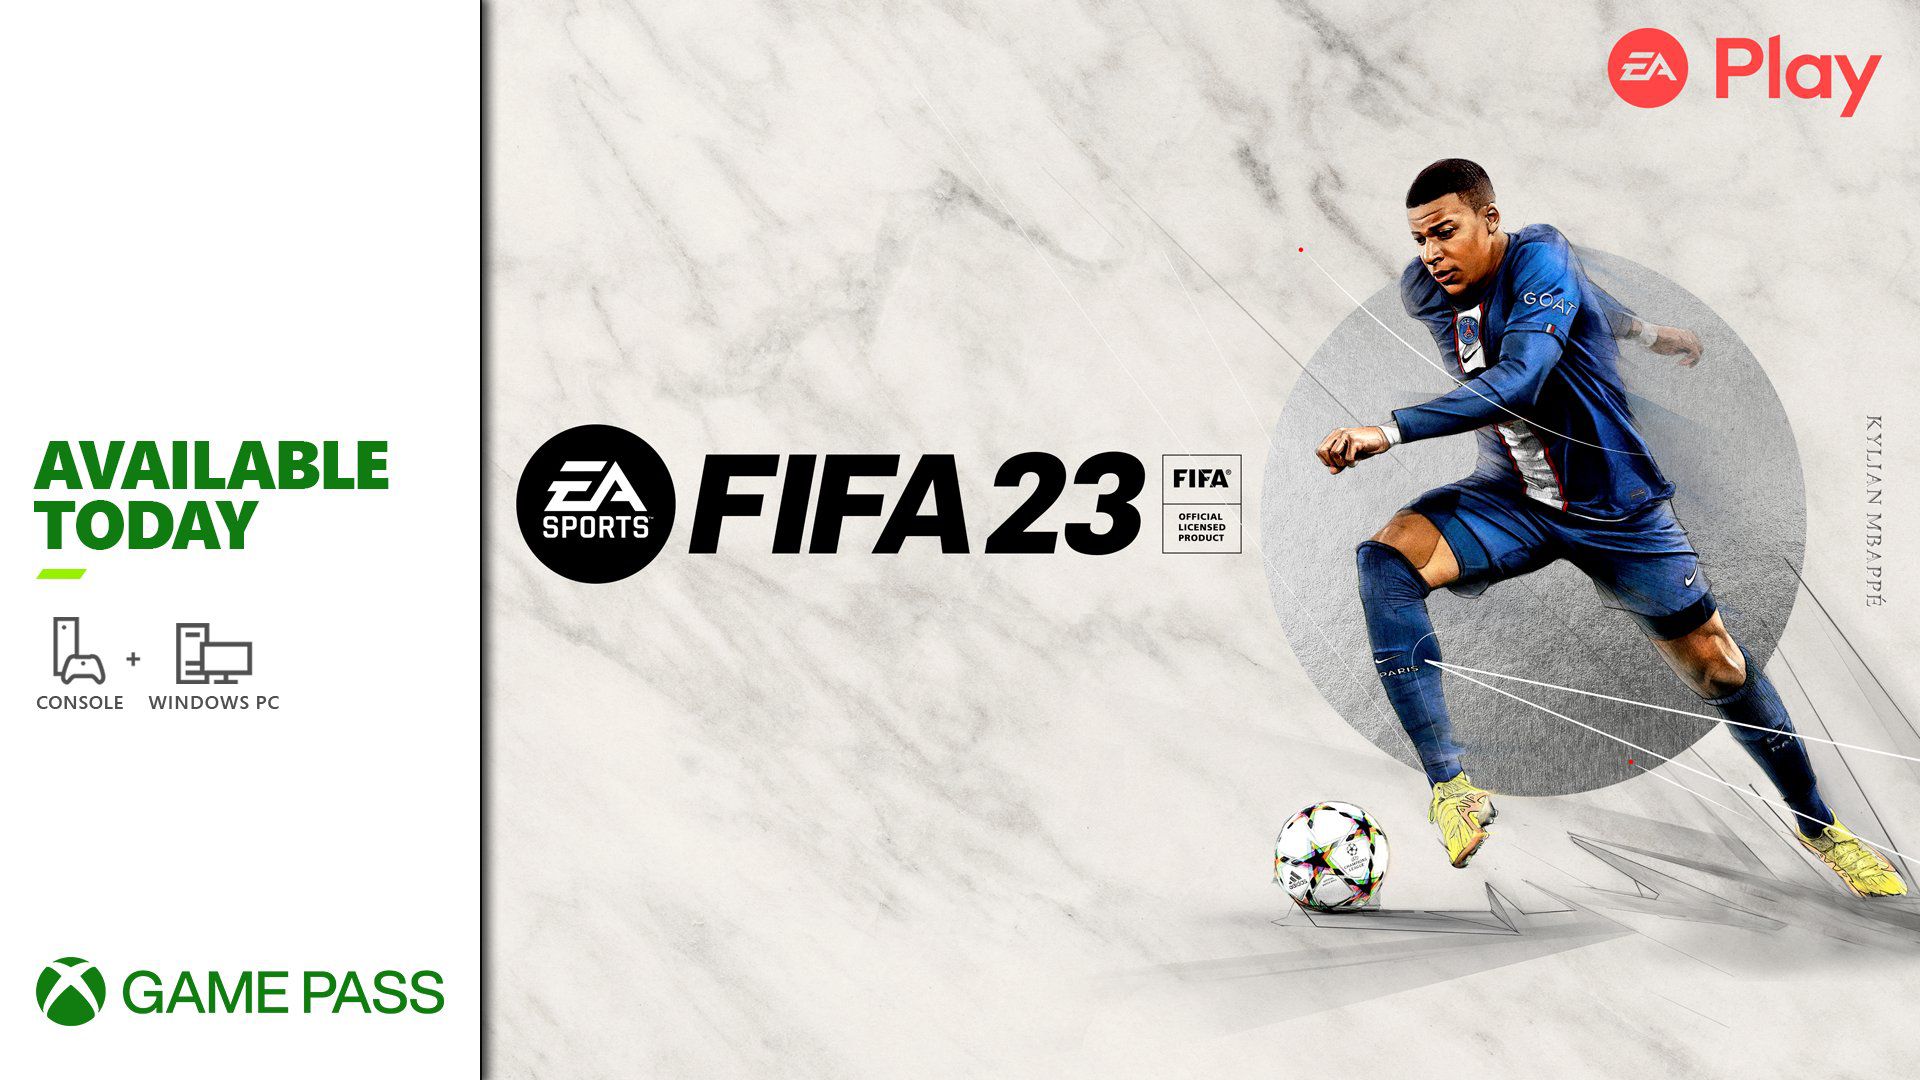 How to Get EA Play Fut SUPERCHARGE Pack in Fifa 23 